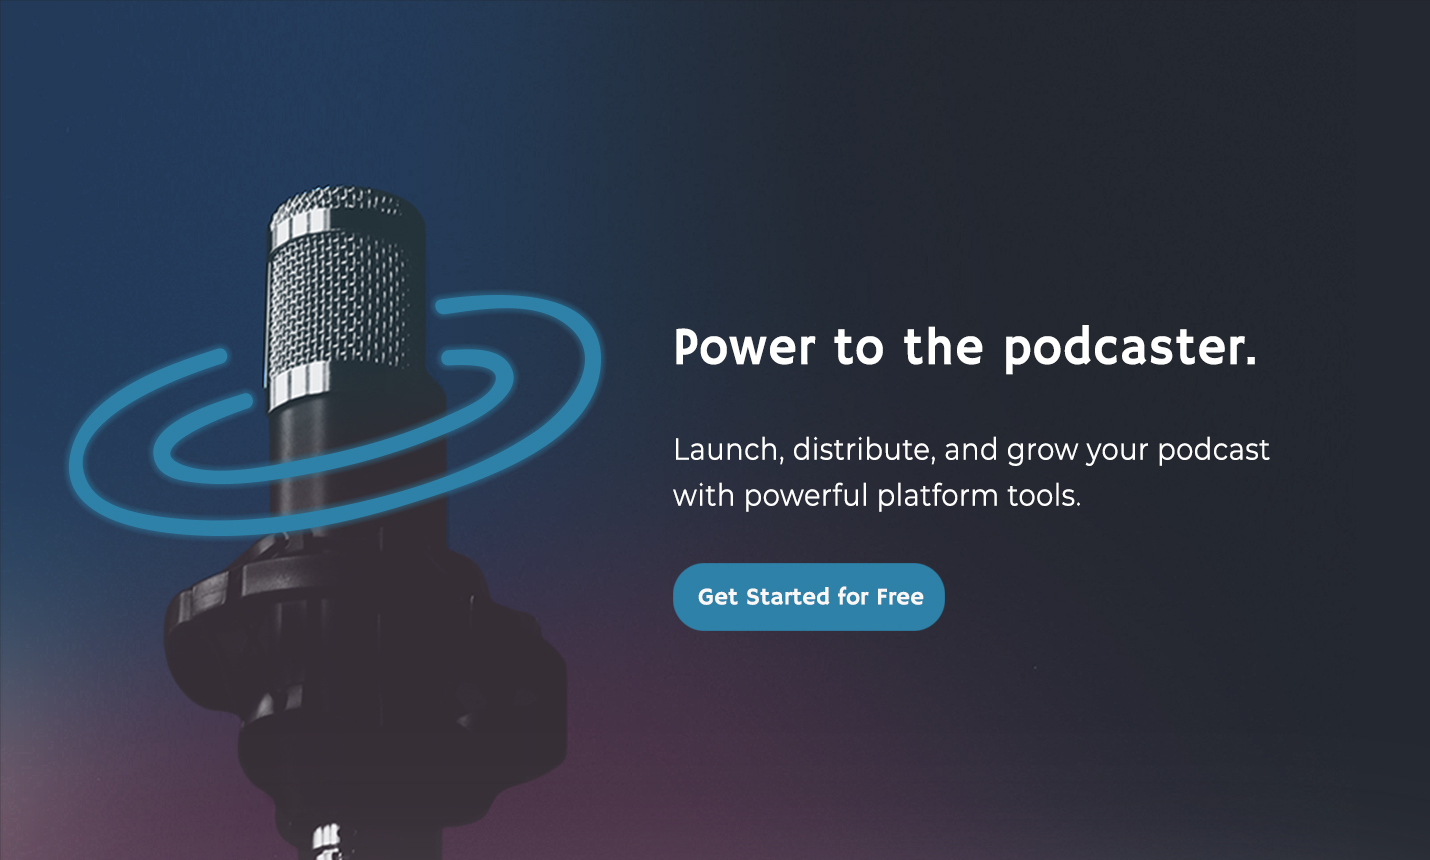 Power to the Podcaster